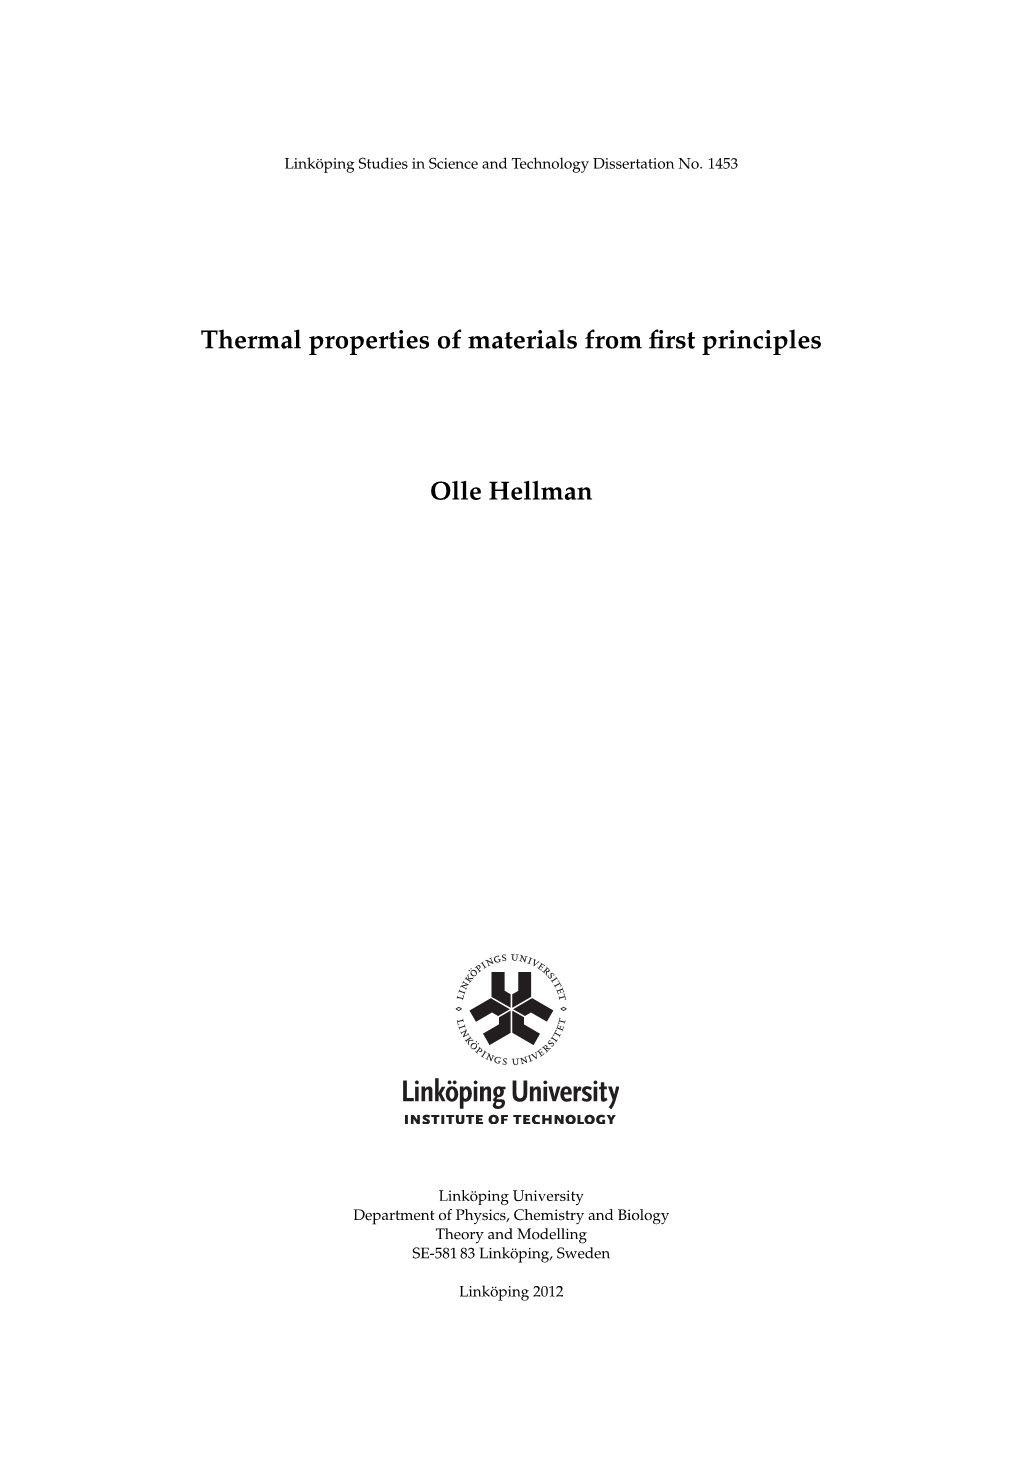 Thermal Properties of Materials from First Principles Olle Hellman